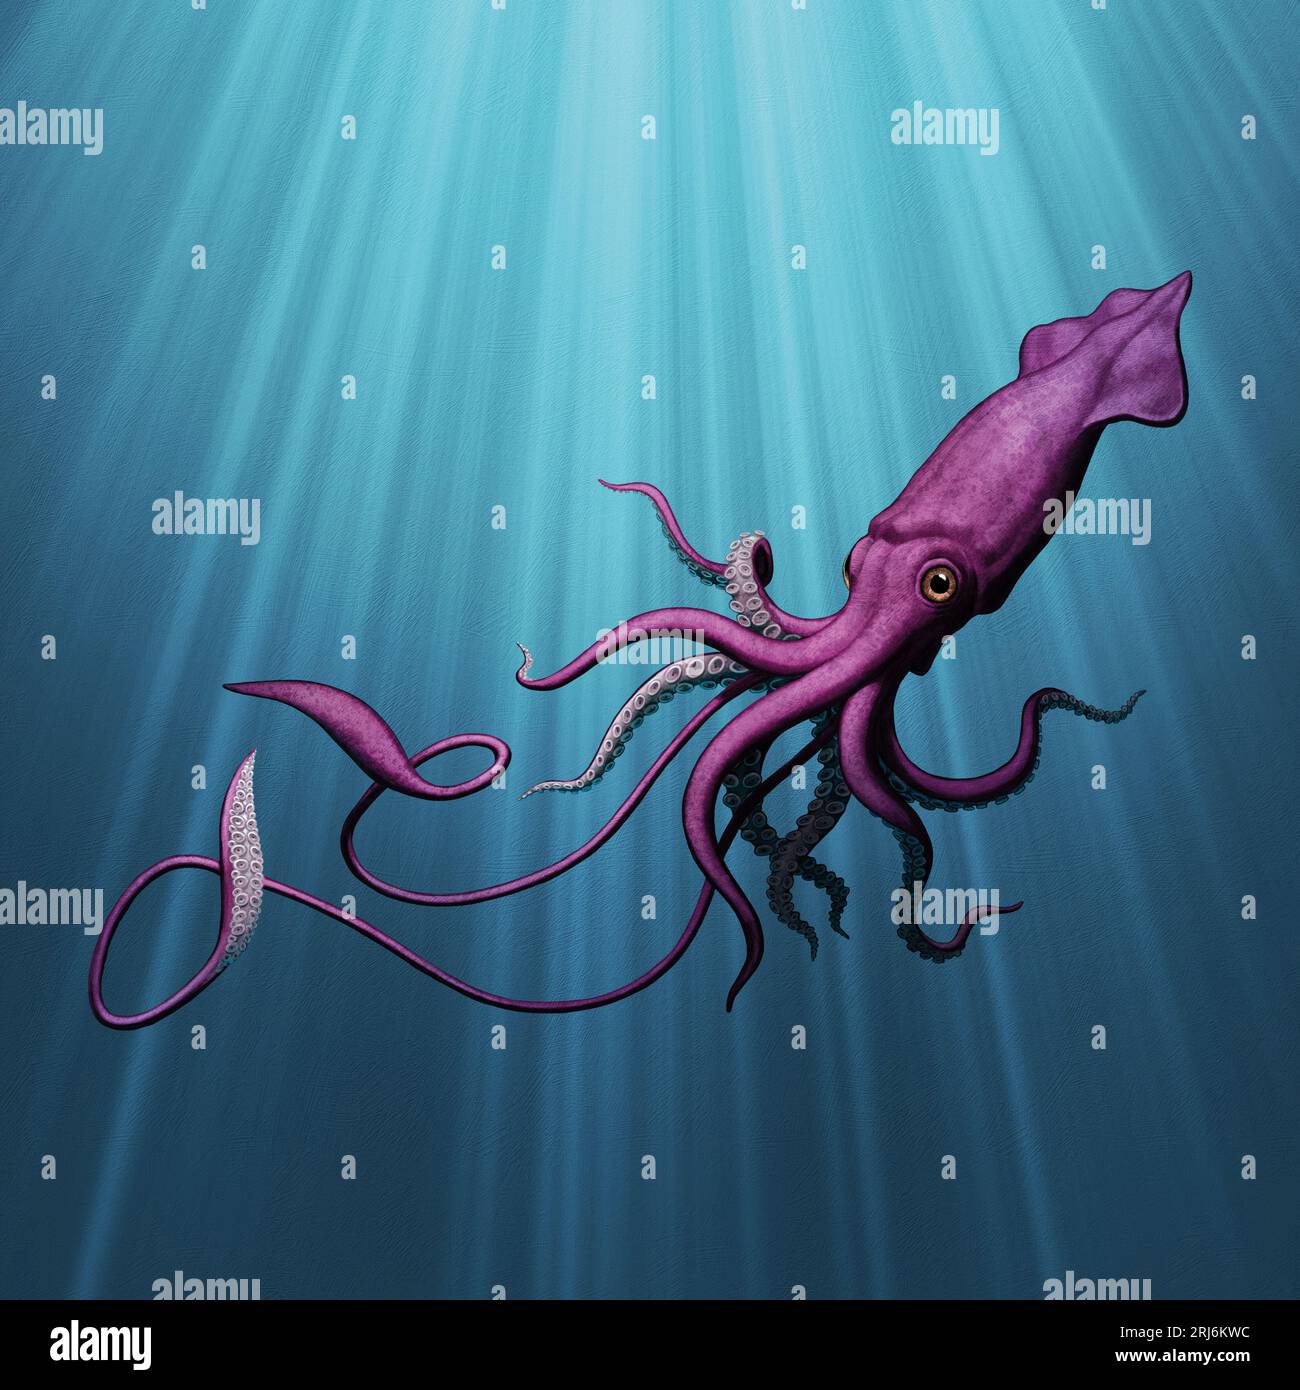 Giant Squid Swimming Under Water with Light Beams Stock Photo